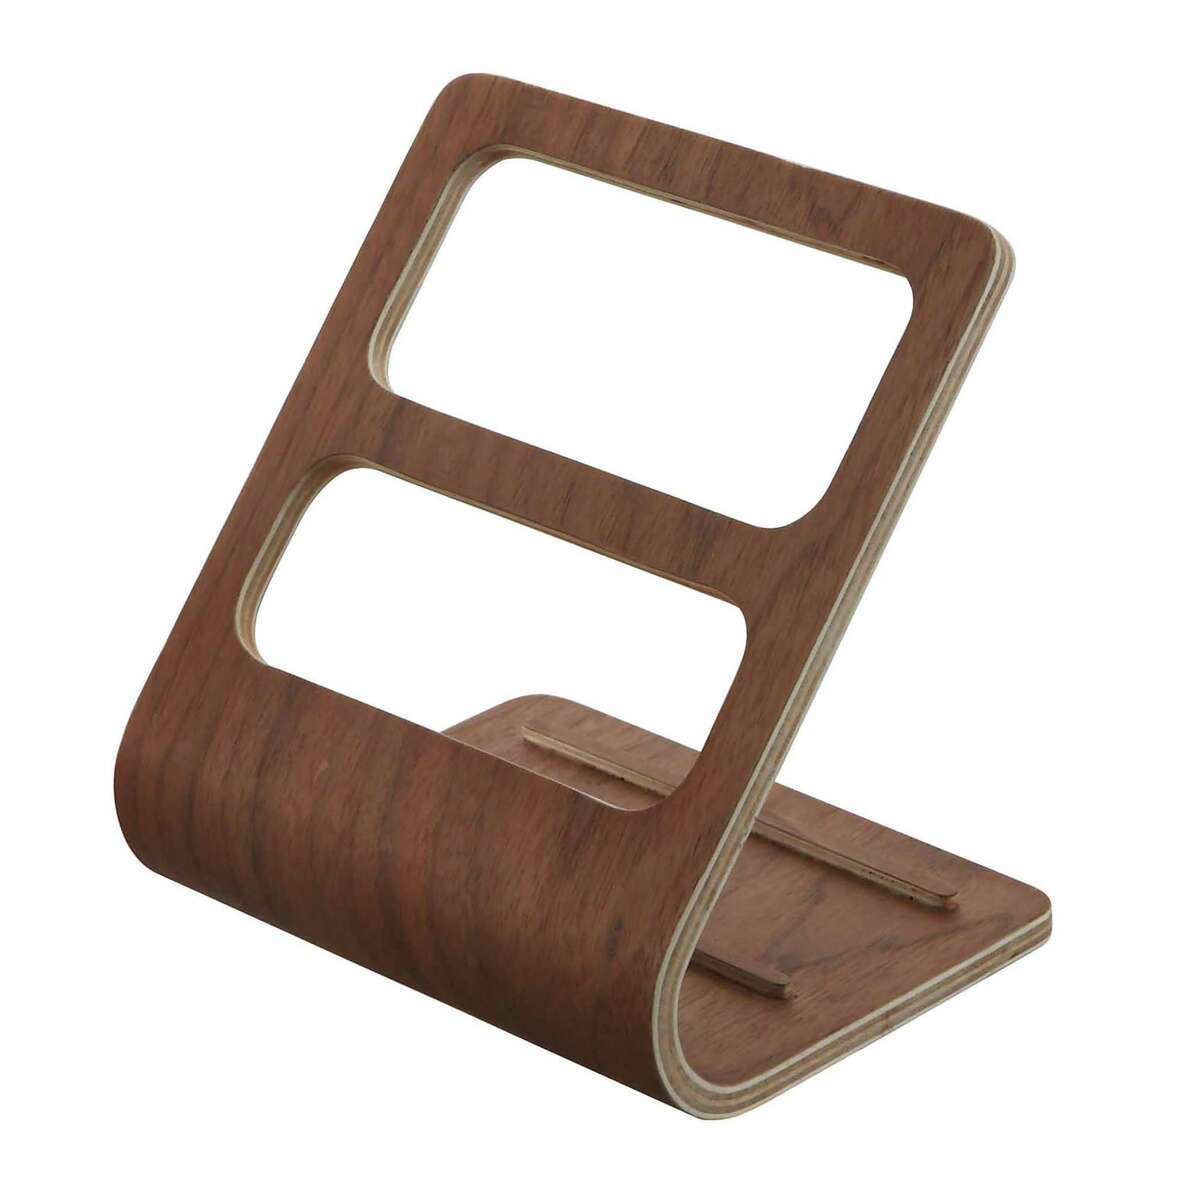 The Yamazaki remote control organizer rack ($25, westelm.com). Designed in Japan and made in China with plywood, the piece has a small footprint at roughly 5 by 6 by 6 inches.